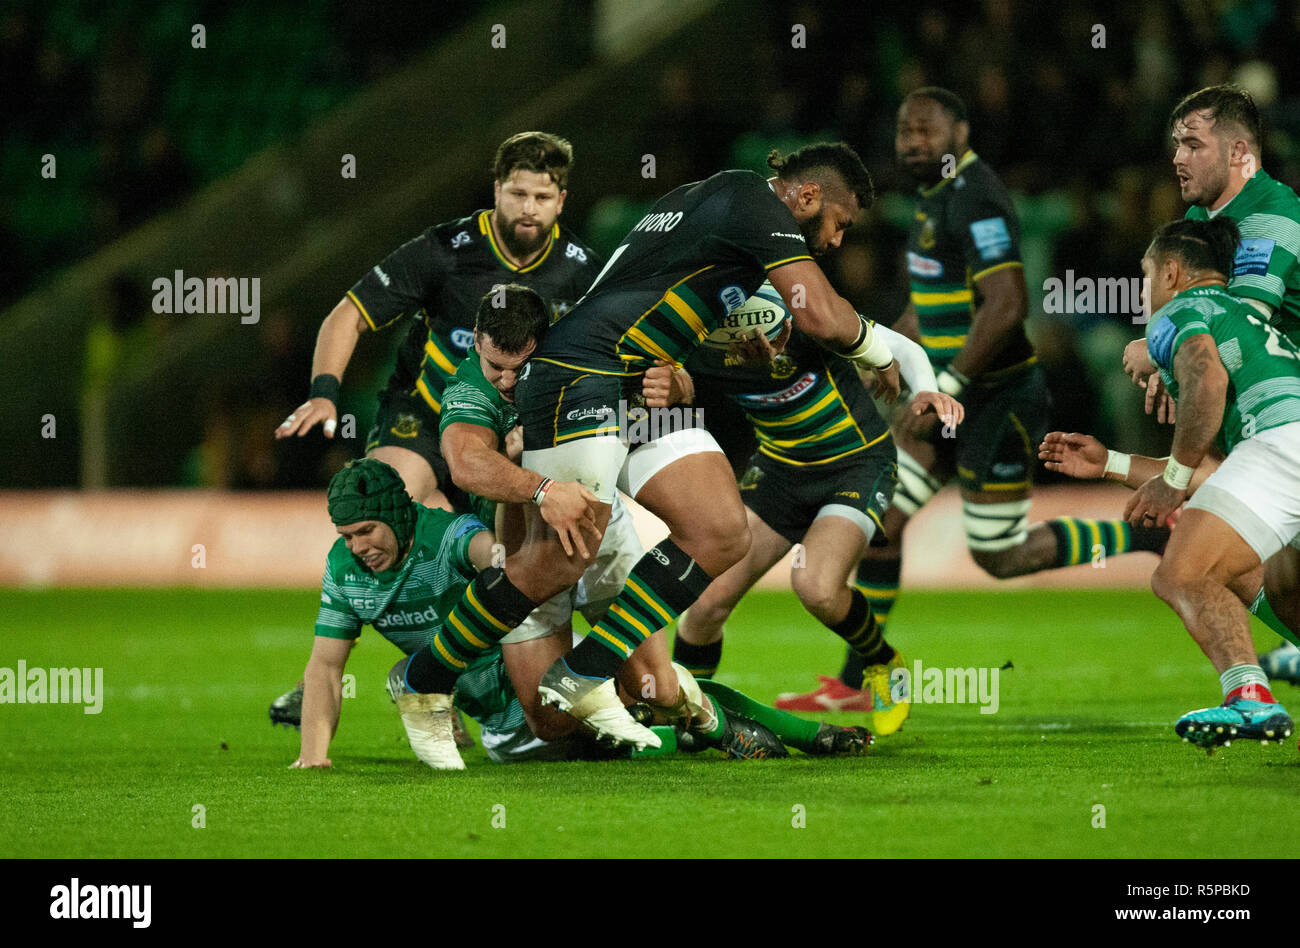 Northampton, UK. 1st December 2018. Taqele Naiyaravoro of Northampton Saints is tackled by John Hardie during the Gallagher Premiership Rugby match between Northampton Saints and Newcastle Falcons. Andrew Taylor/Alamy Live News Stock Photo